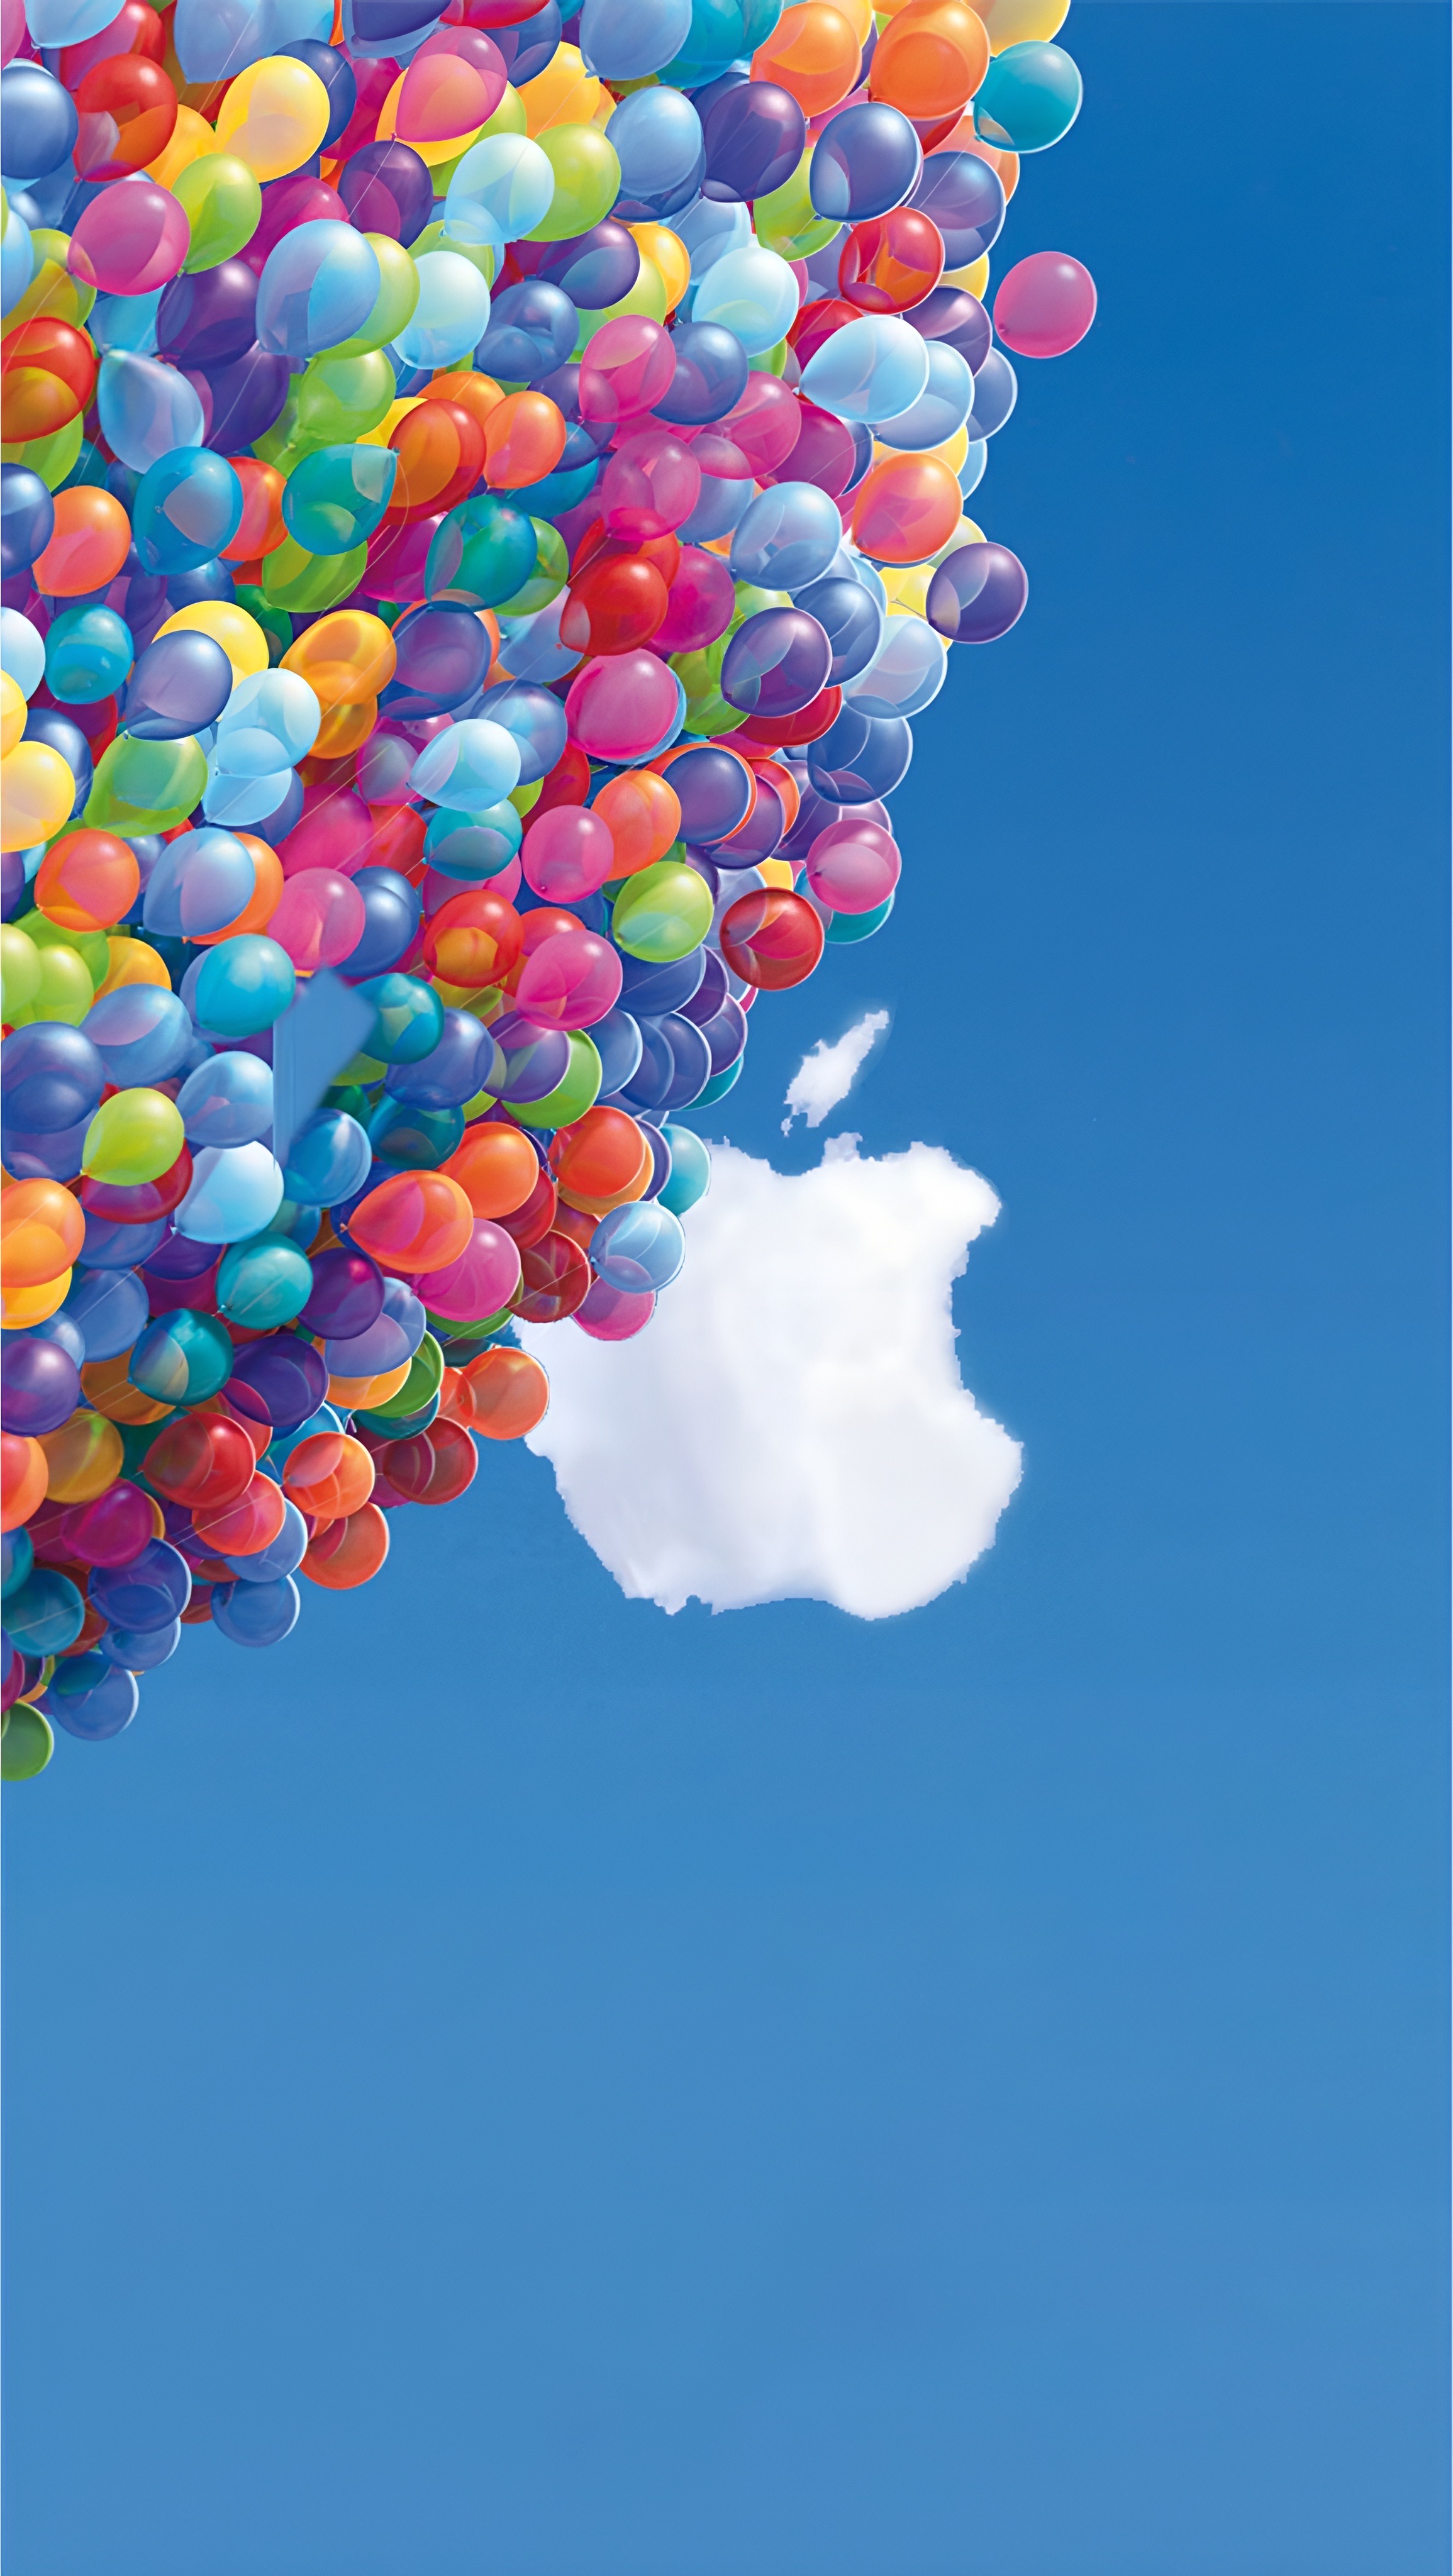 Balloon Background Images  Free iPhone  Zoom HD Wallpapers  Vectors   rawpixel